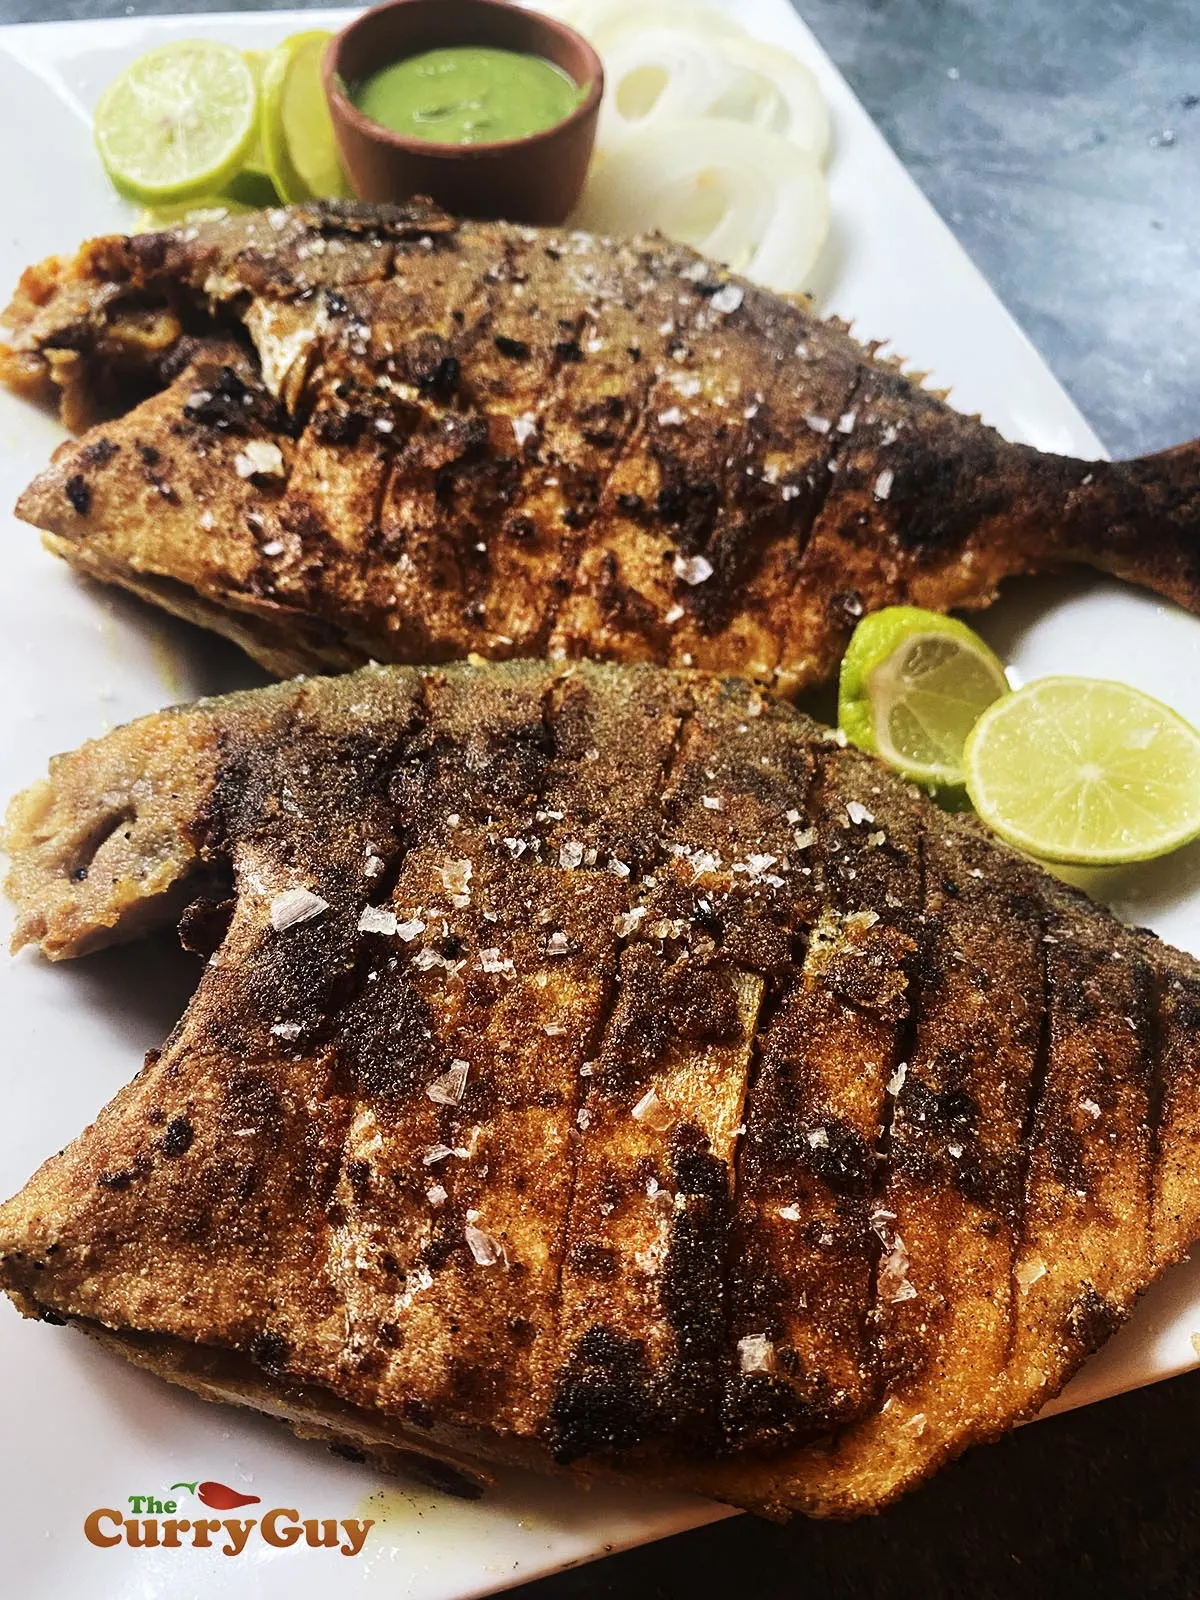 Finsihed Indian fish fry